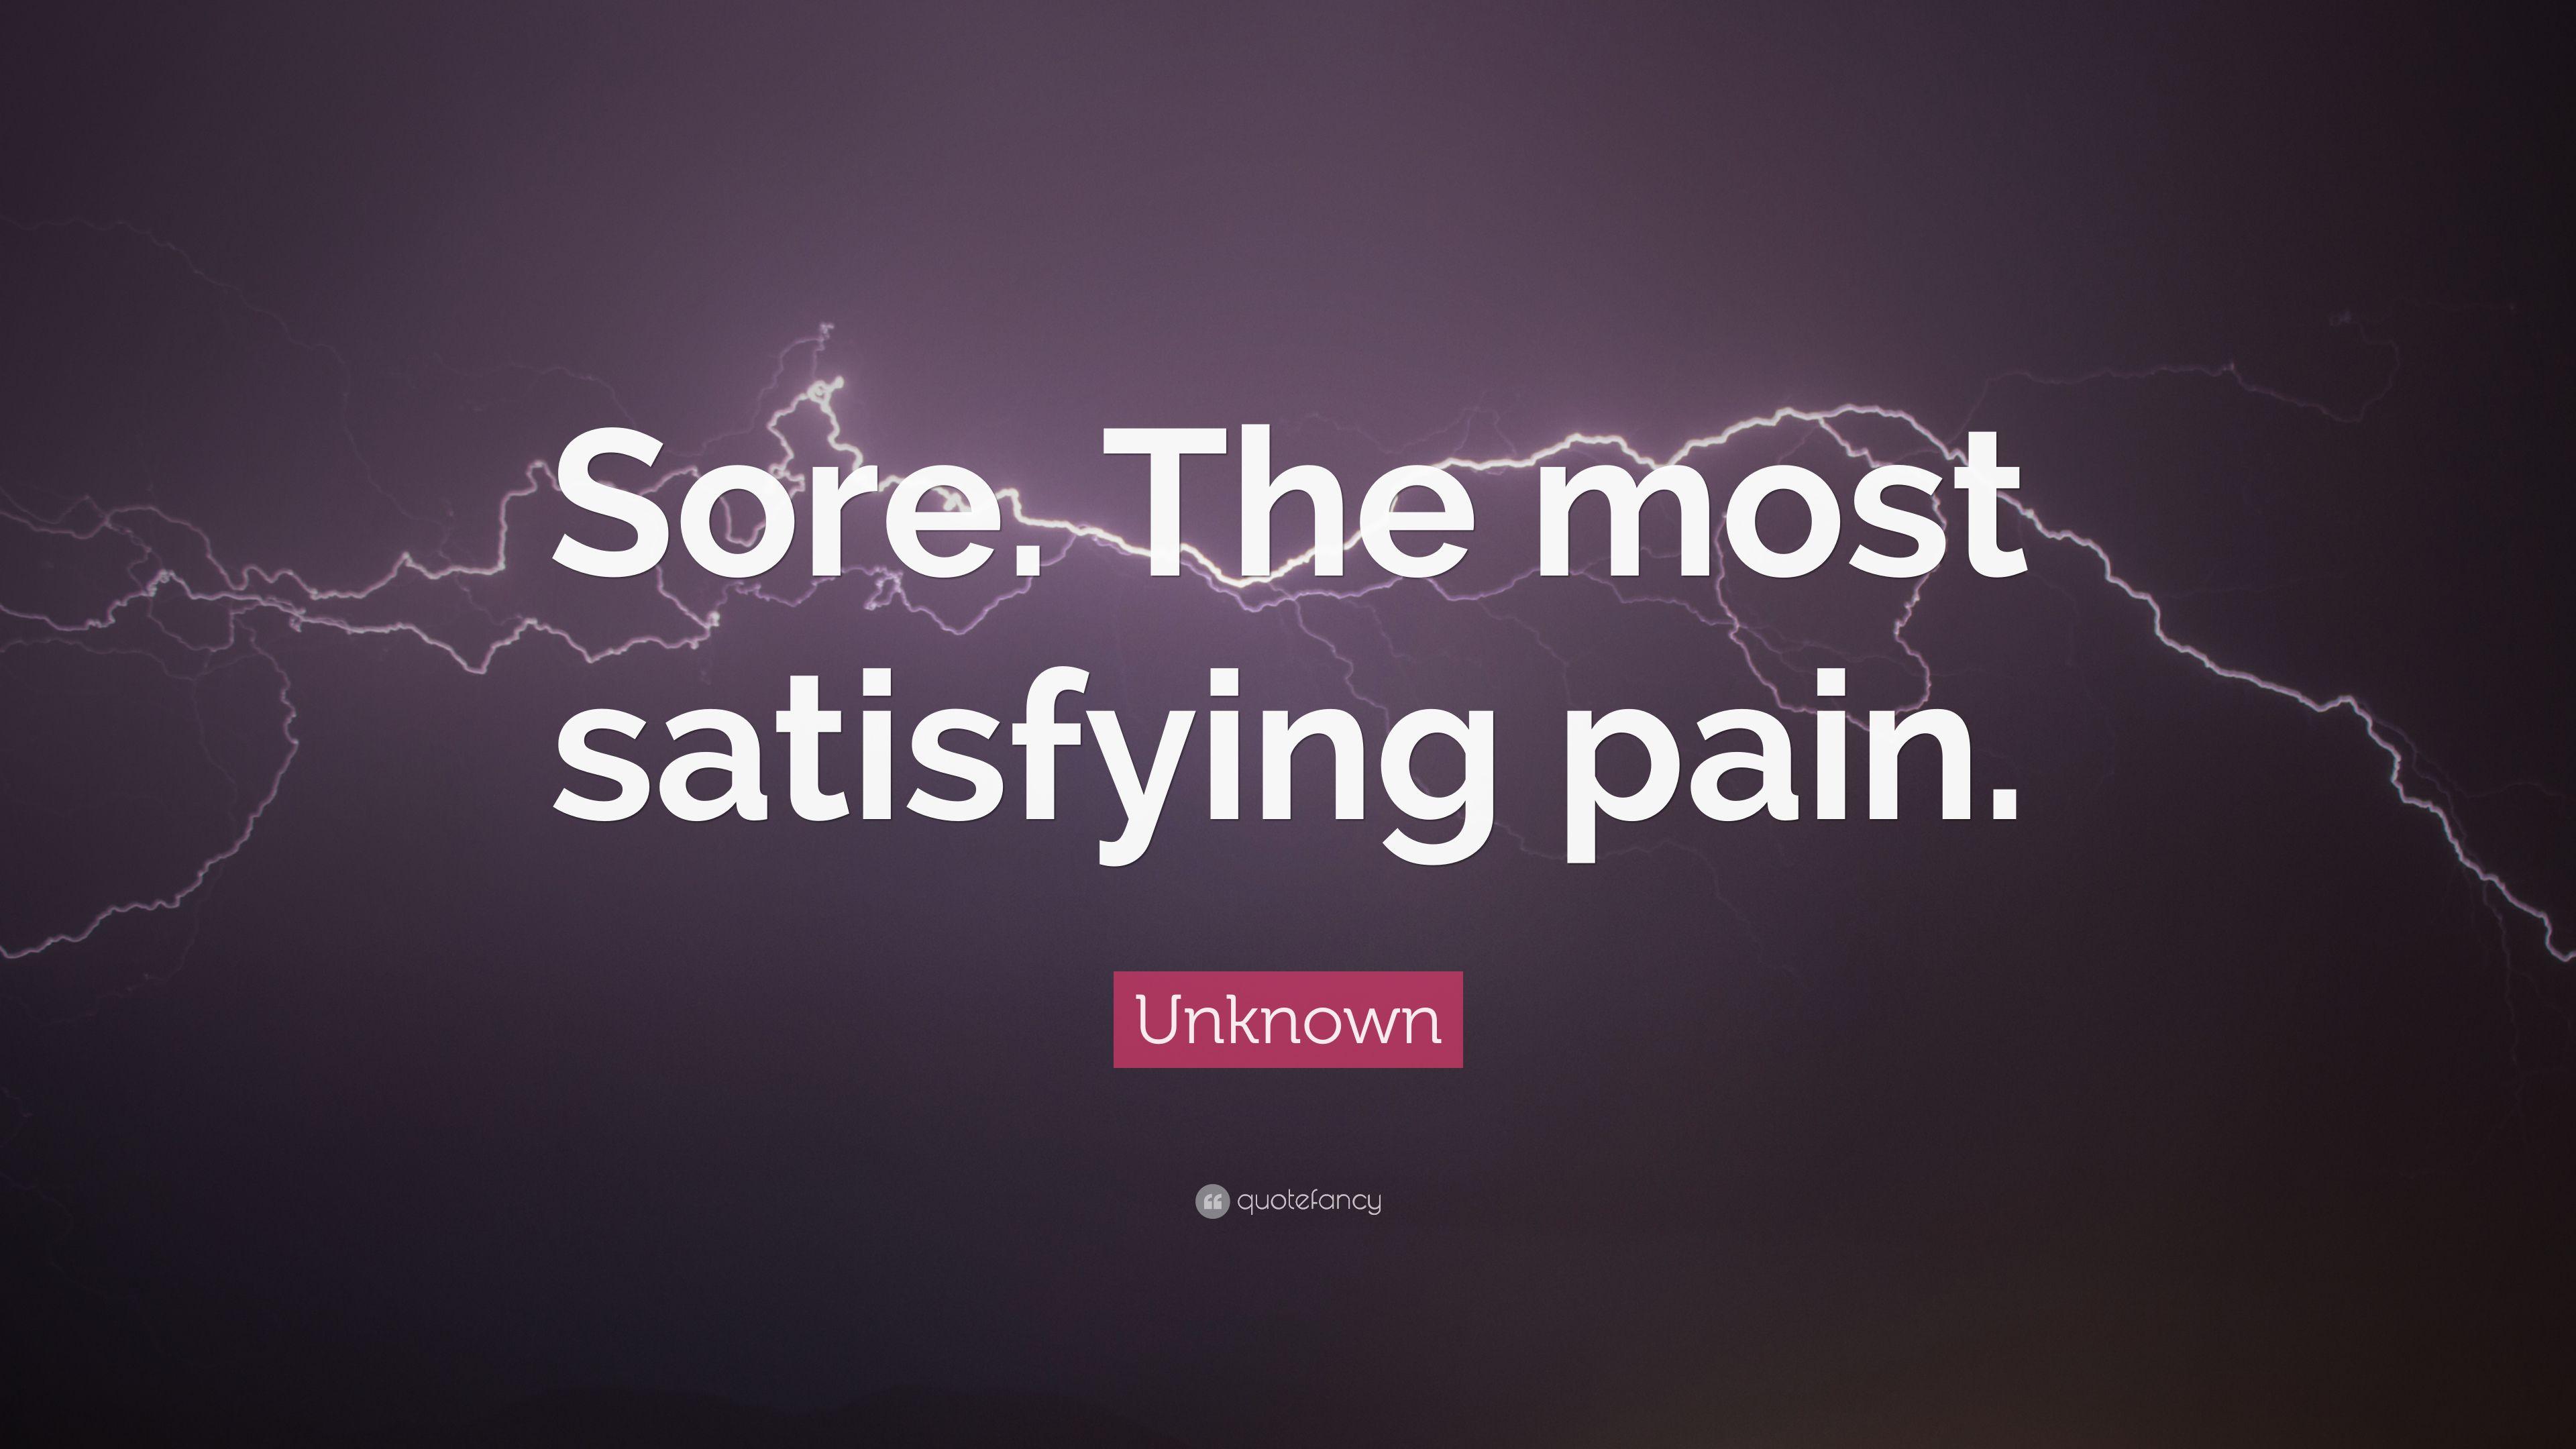 Unknown Quote: “Sore. The most satisfying pain.” 15 wallpaper